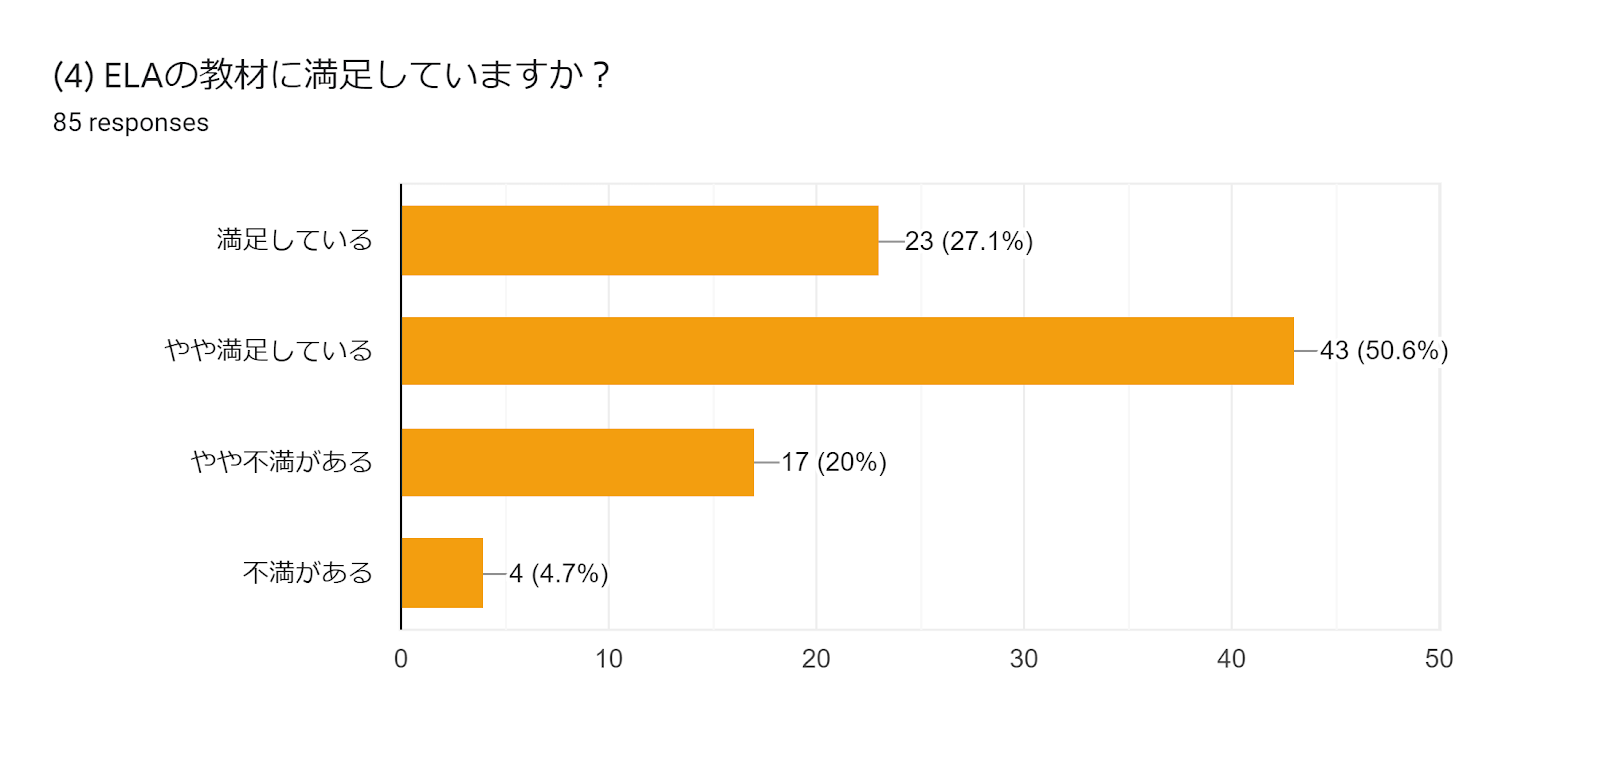 Forms response chart. Question title: (4) ELAの教材に満足していますか？. Number of responses: 85 responses.